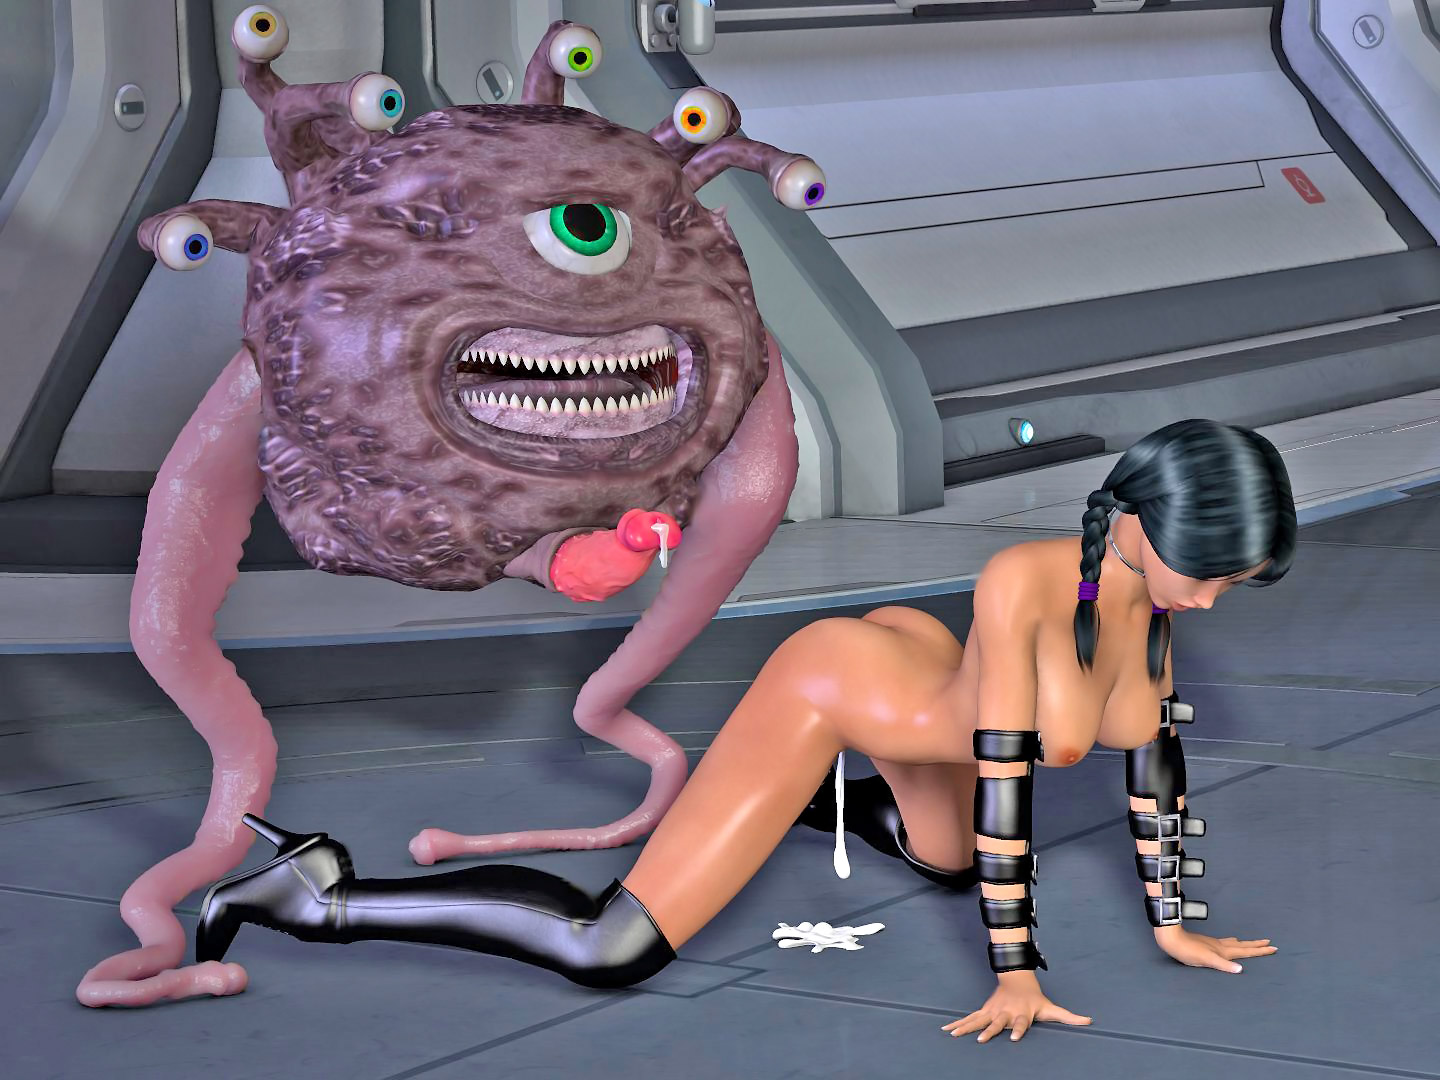 1440px x 1080px - Resident evil 3d hentai gosh doing brunette on board of spaceship